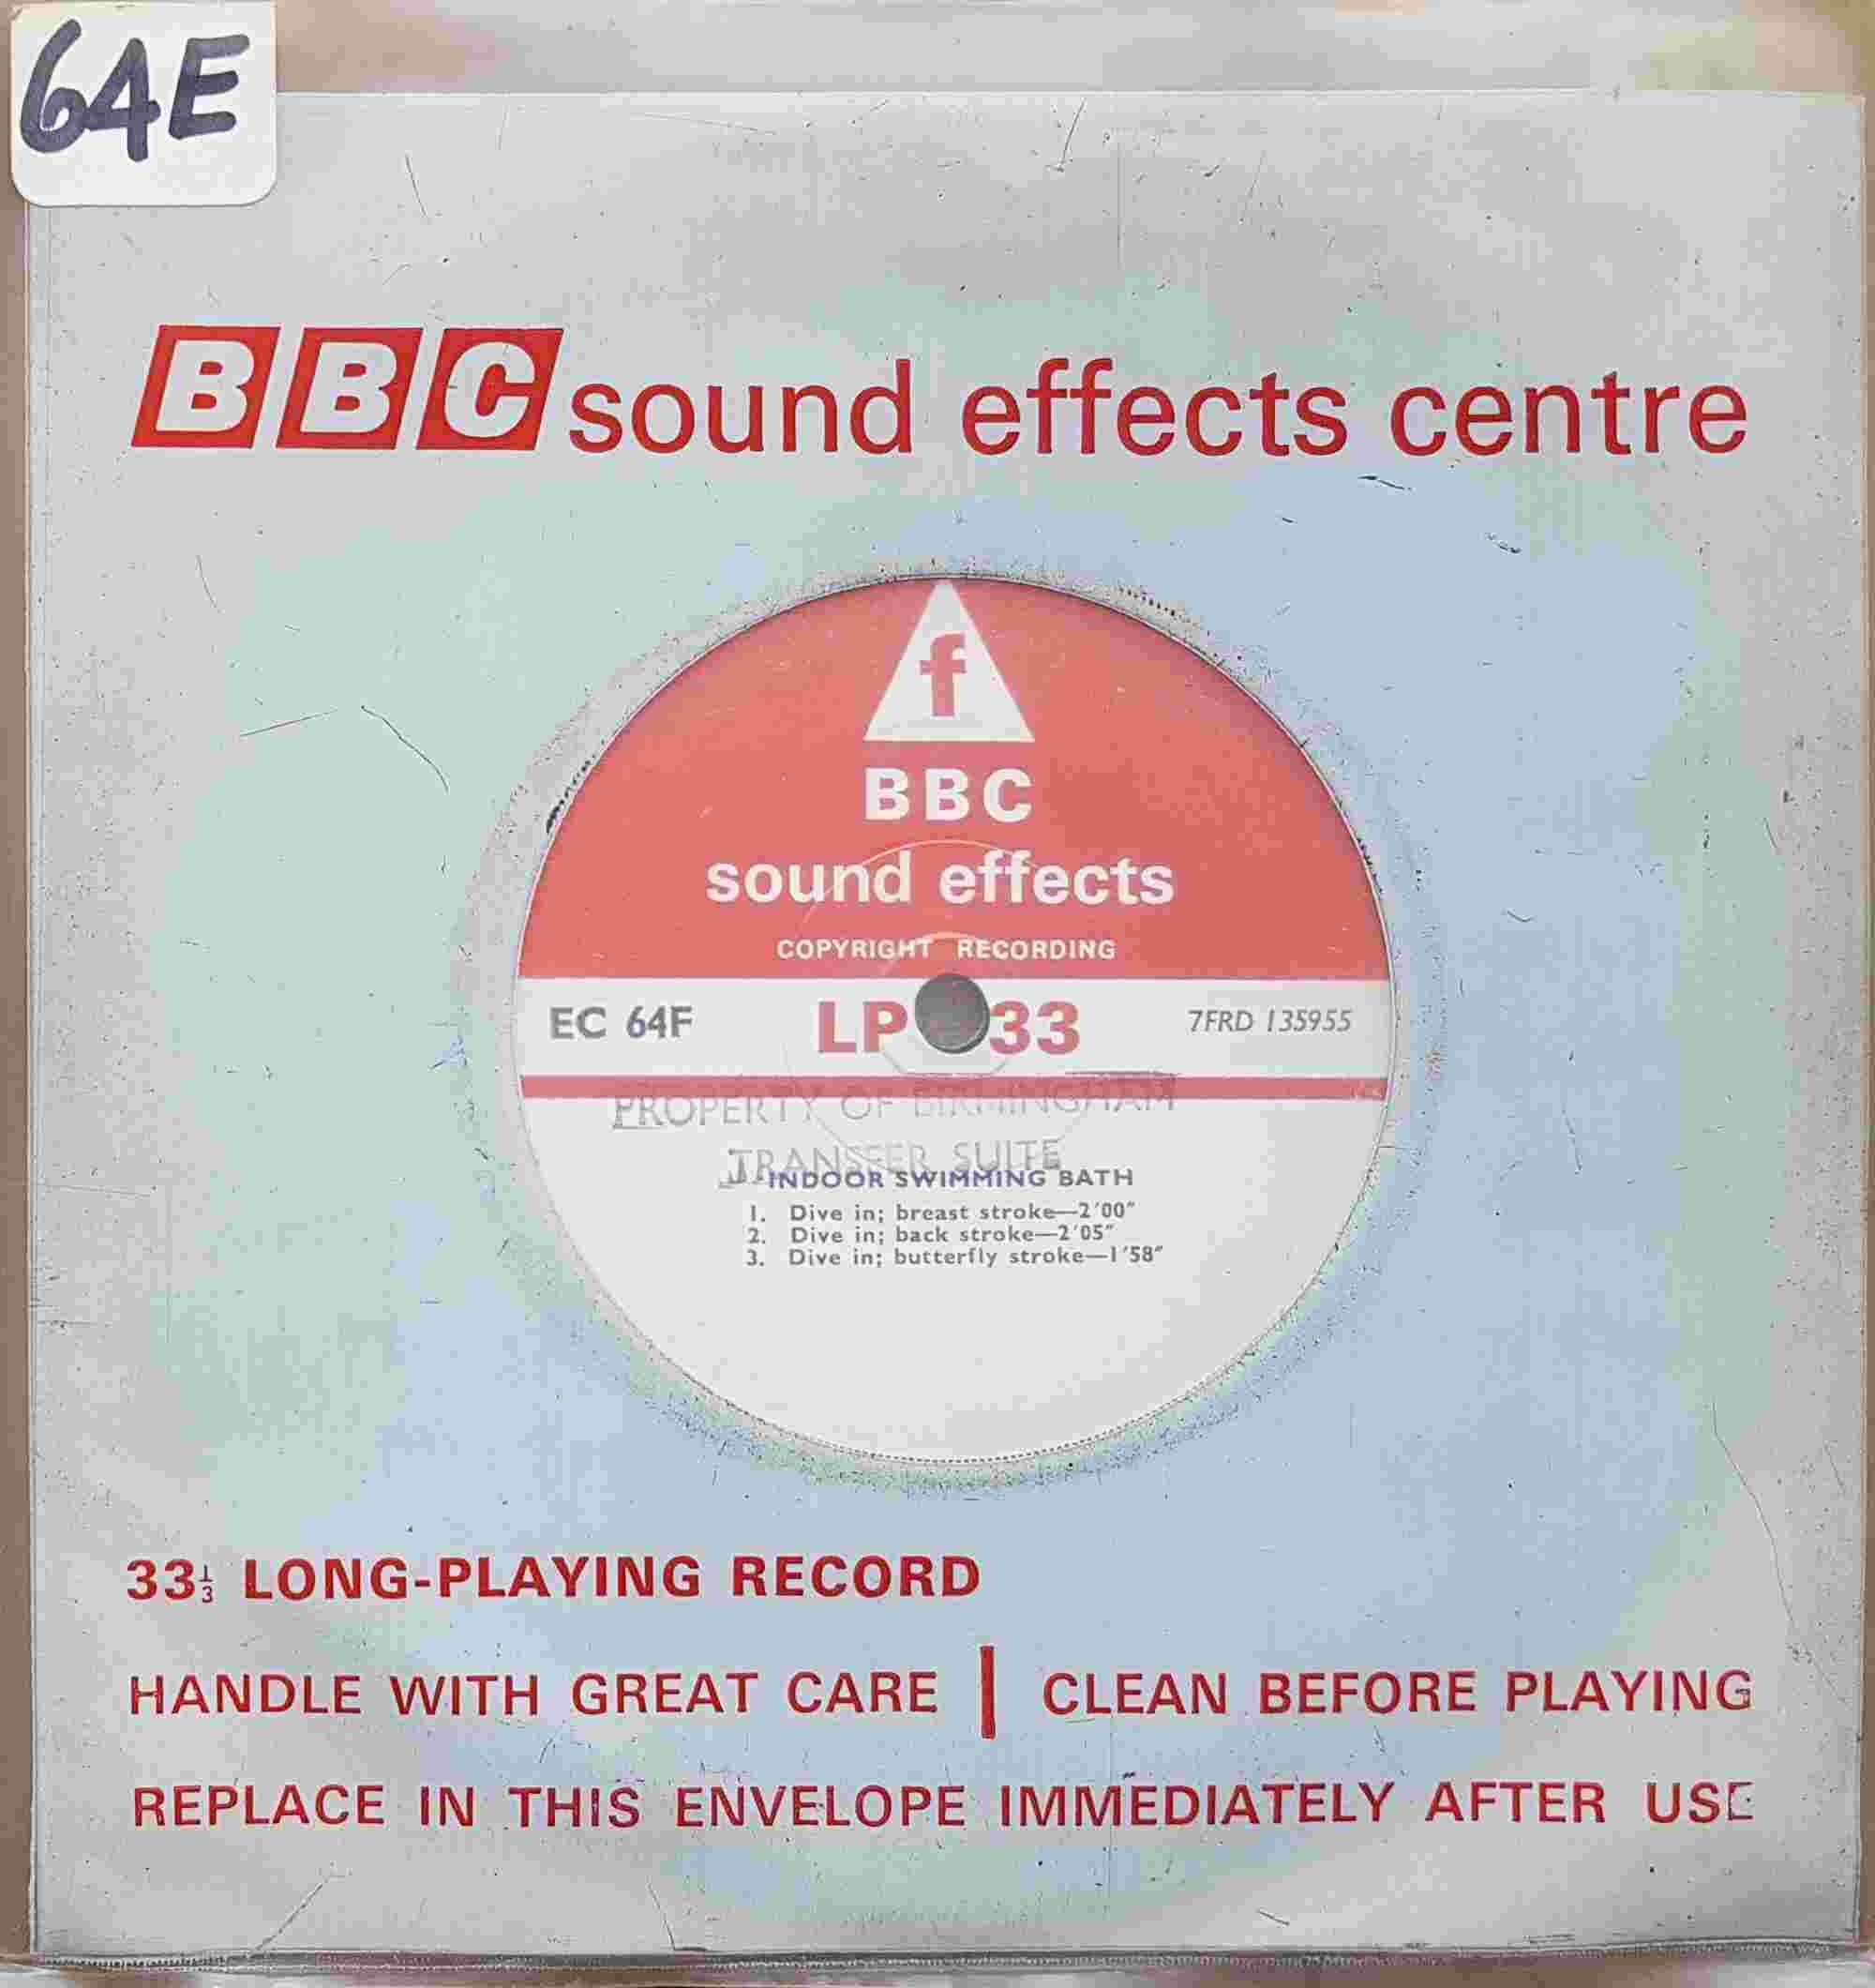 Picture of EC 64F Indoor swimming bath single by artist Not registered from the BBC records and Tapes library